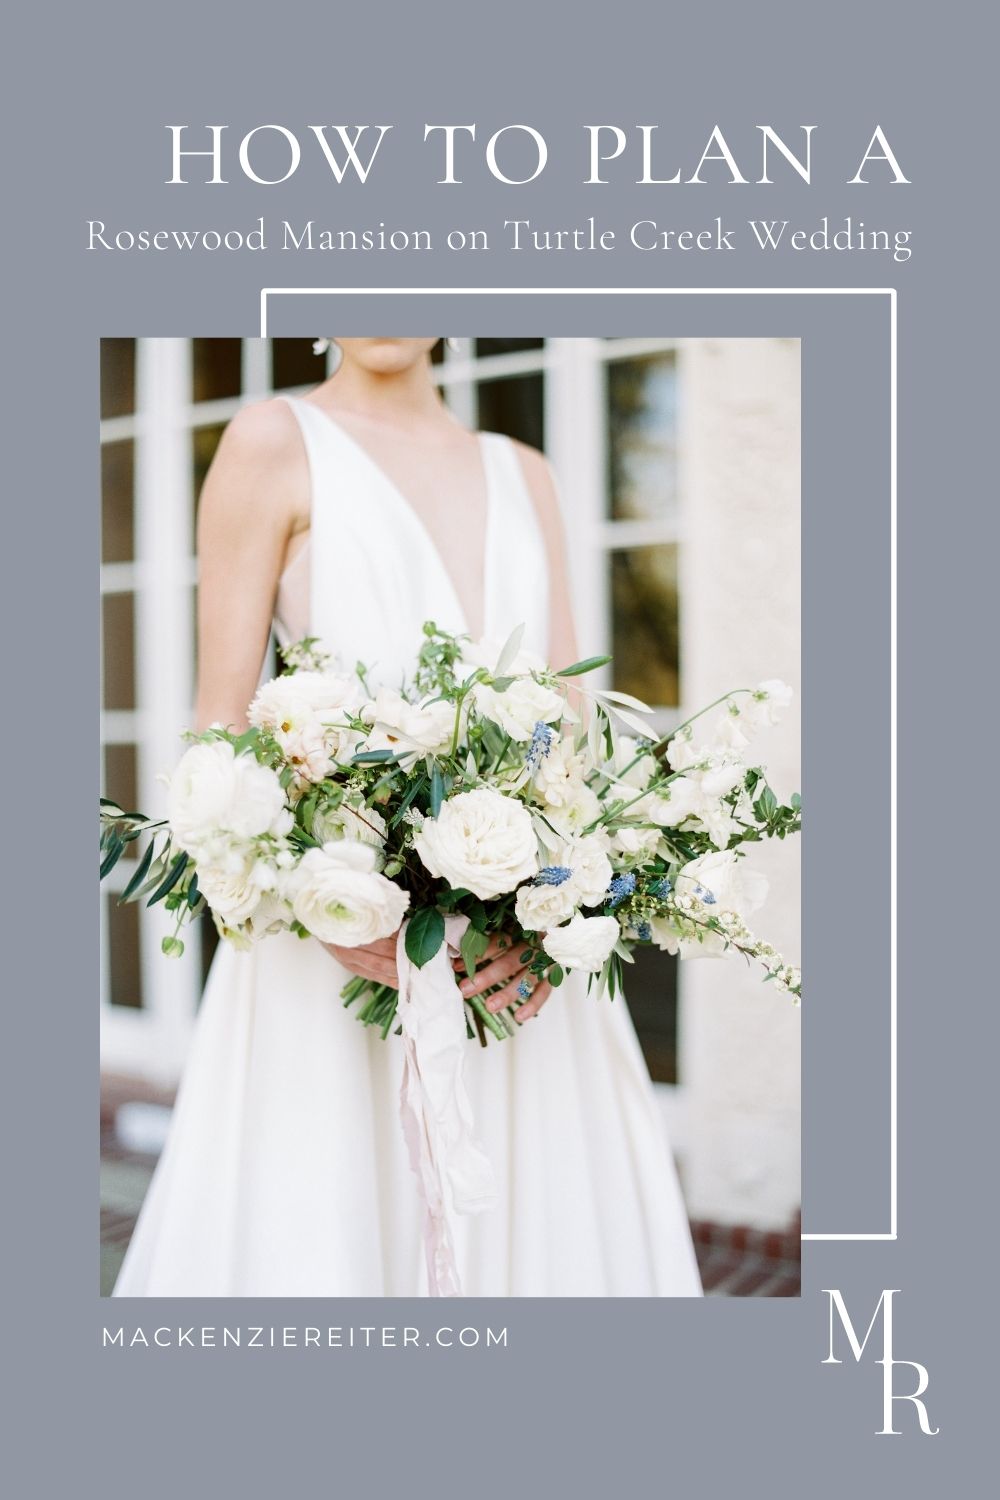 Close up photo of the bride holding her white rose bouquet; image overlaid with text that reads How to Plan a Rosewood Mansion on Turtle Creek Wedding